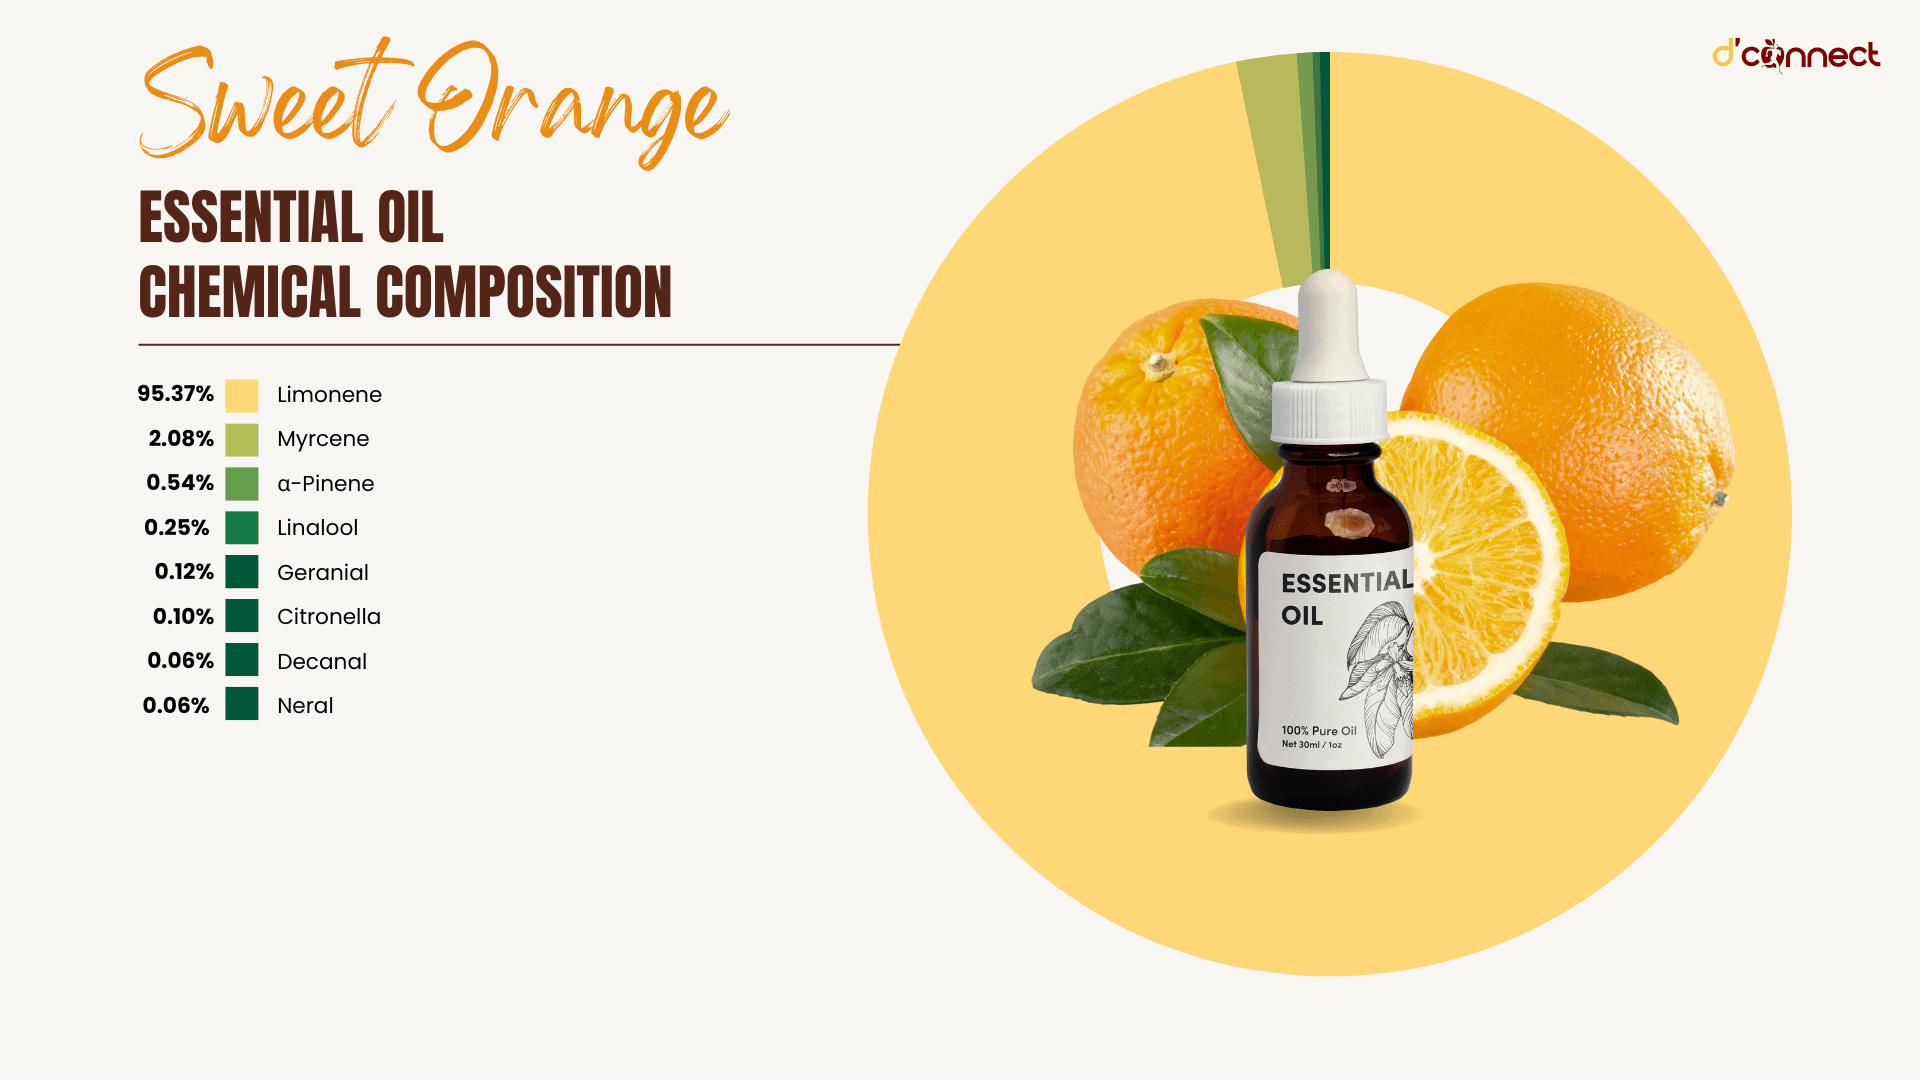 Sweet Orange essential oil - chemical composition